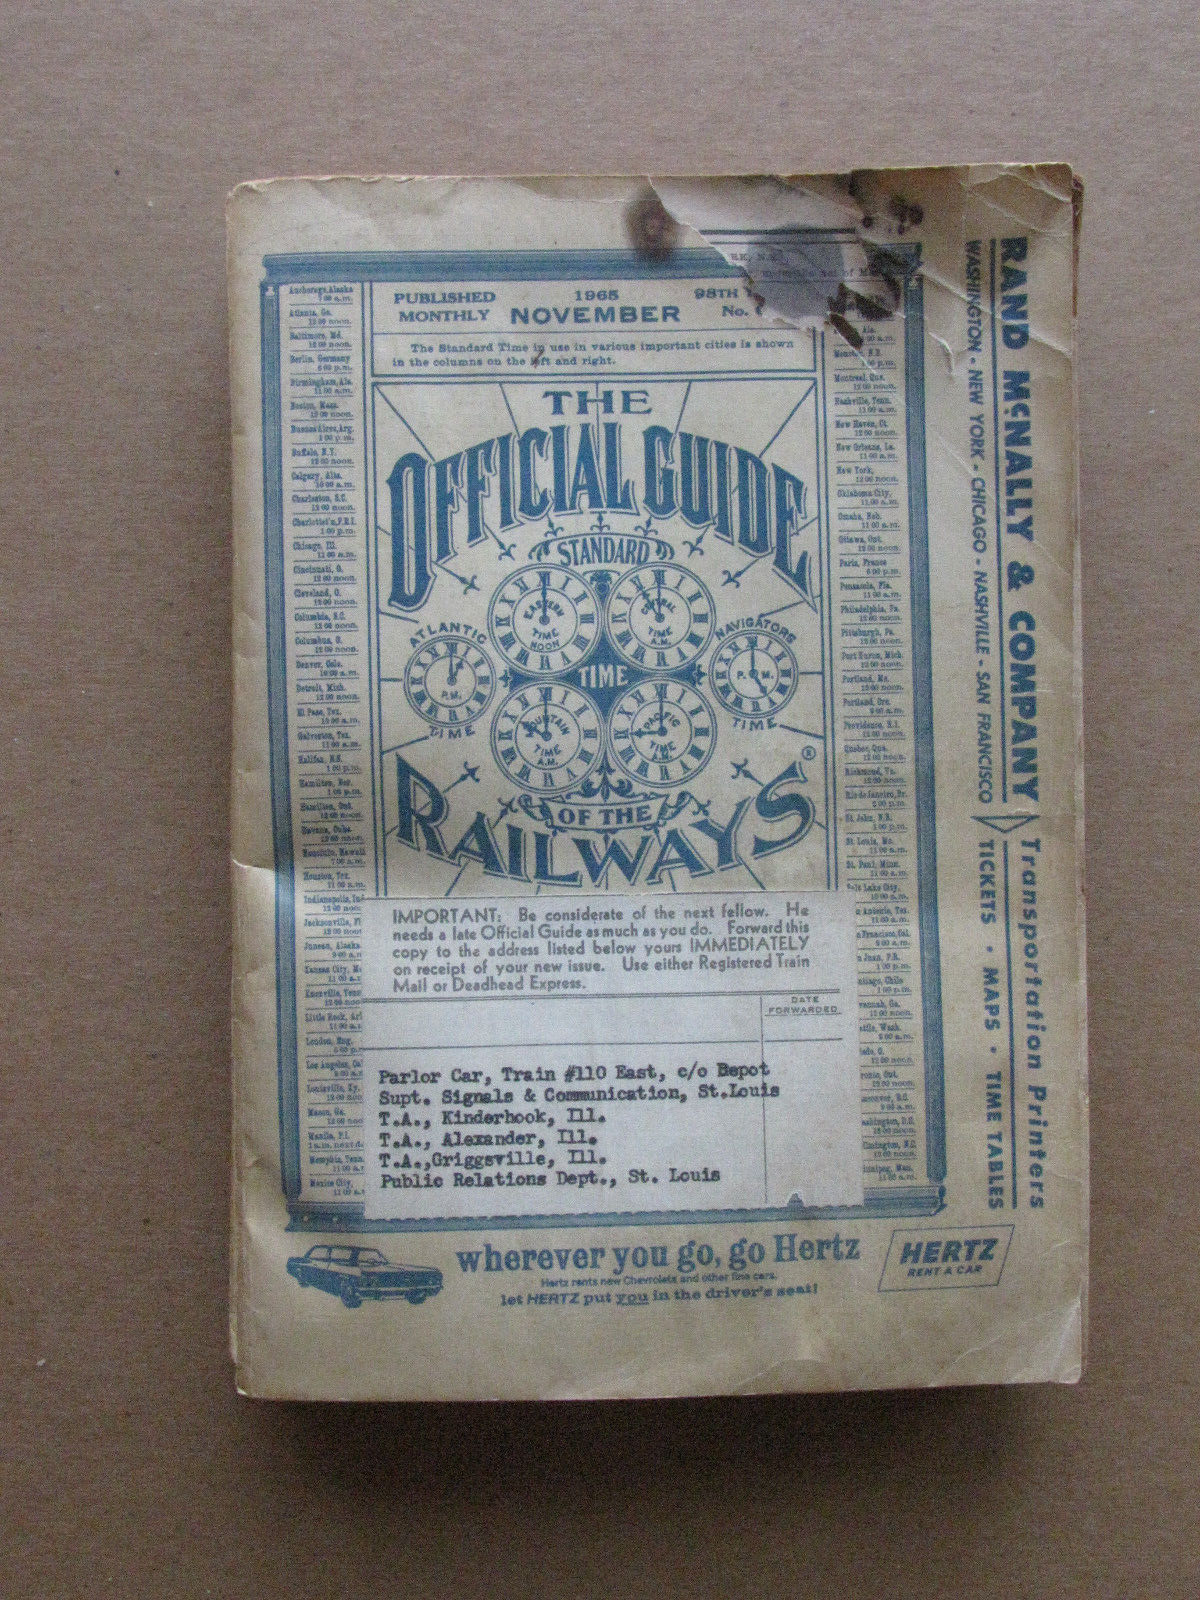 The Official Guide of the Railways, November 1965.  Used.